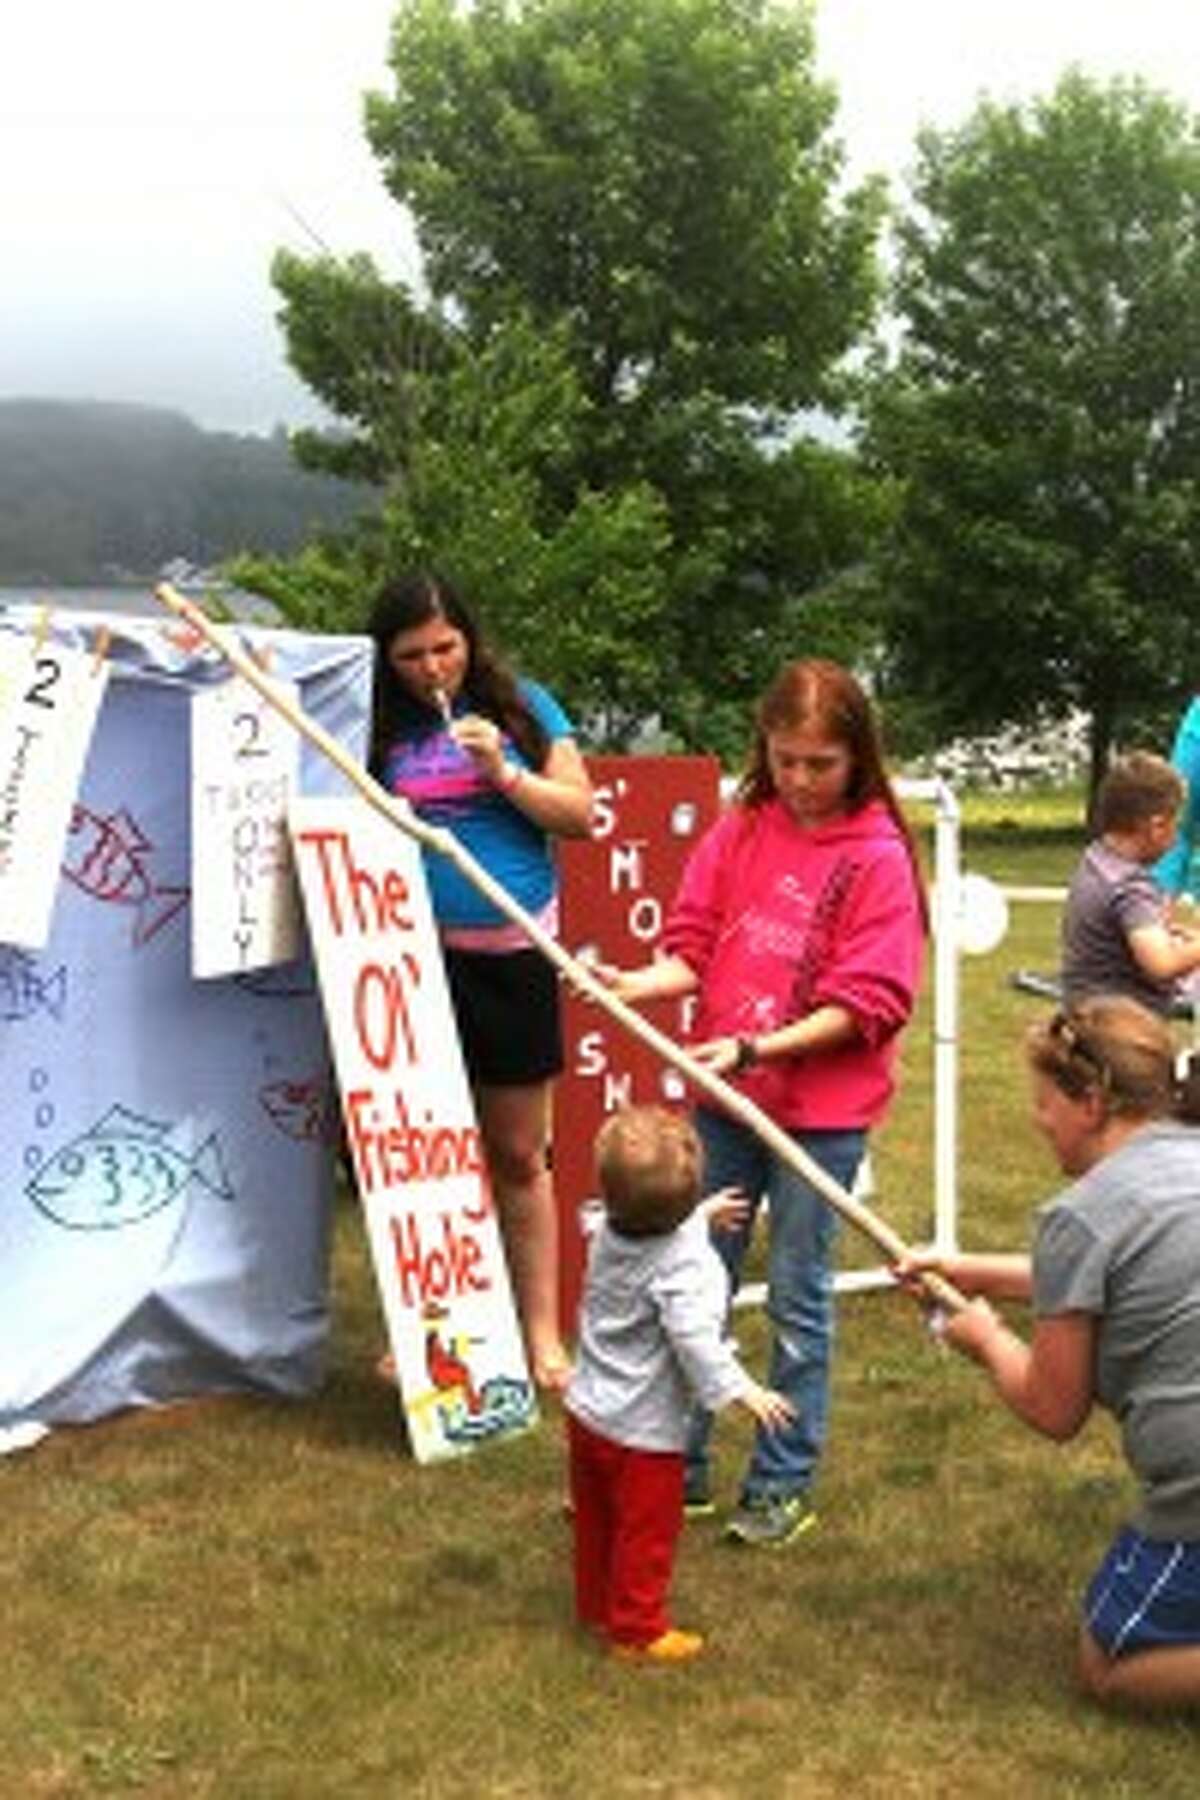 Children’s games have always been a part of the Elberta Solstice Festival, a tradition that will continue.